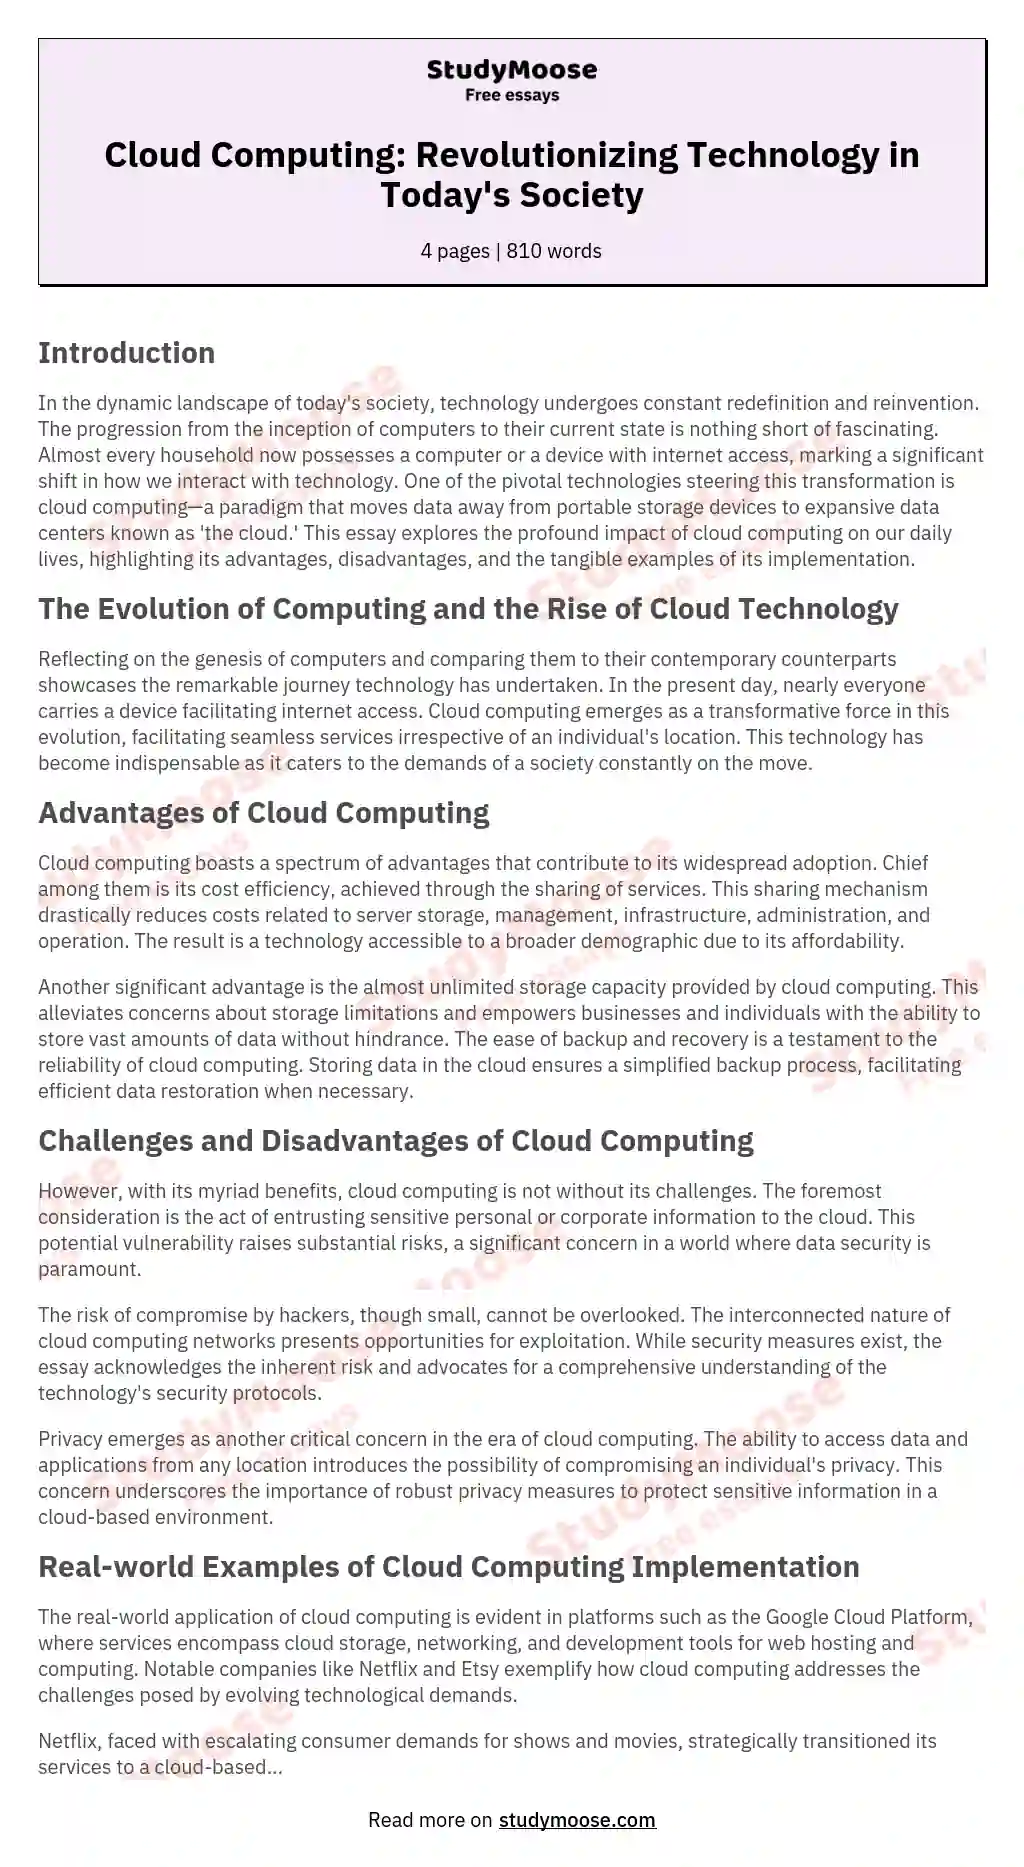 What Are the Pros and Cons of Cloud Computing?